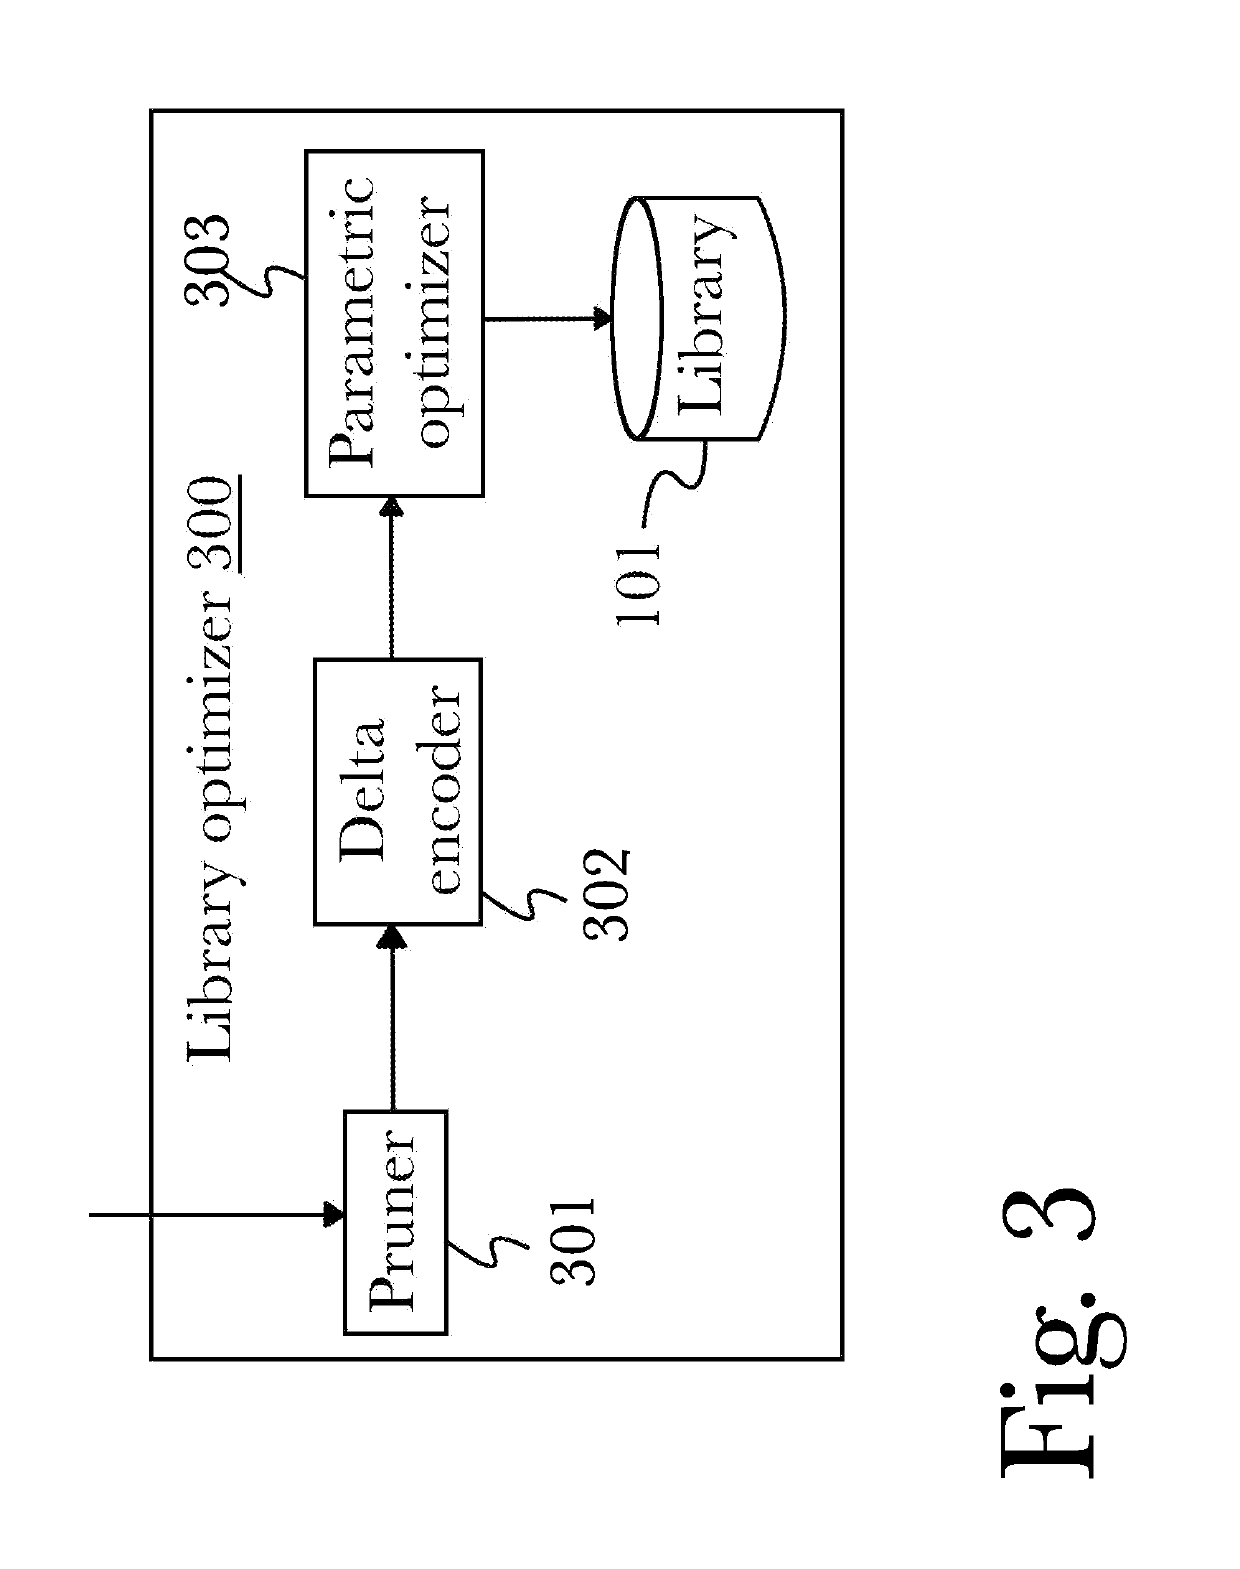 System and method for high-speed transfer of small data sets